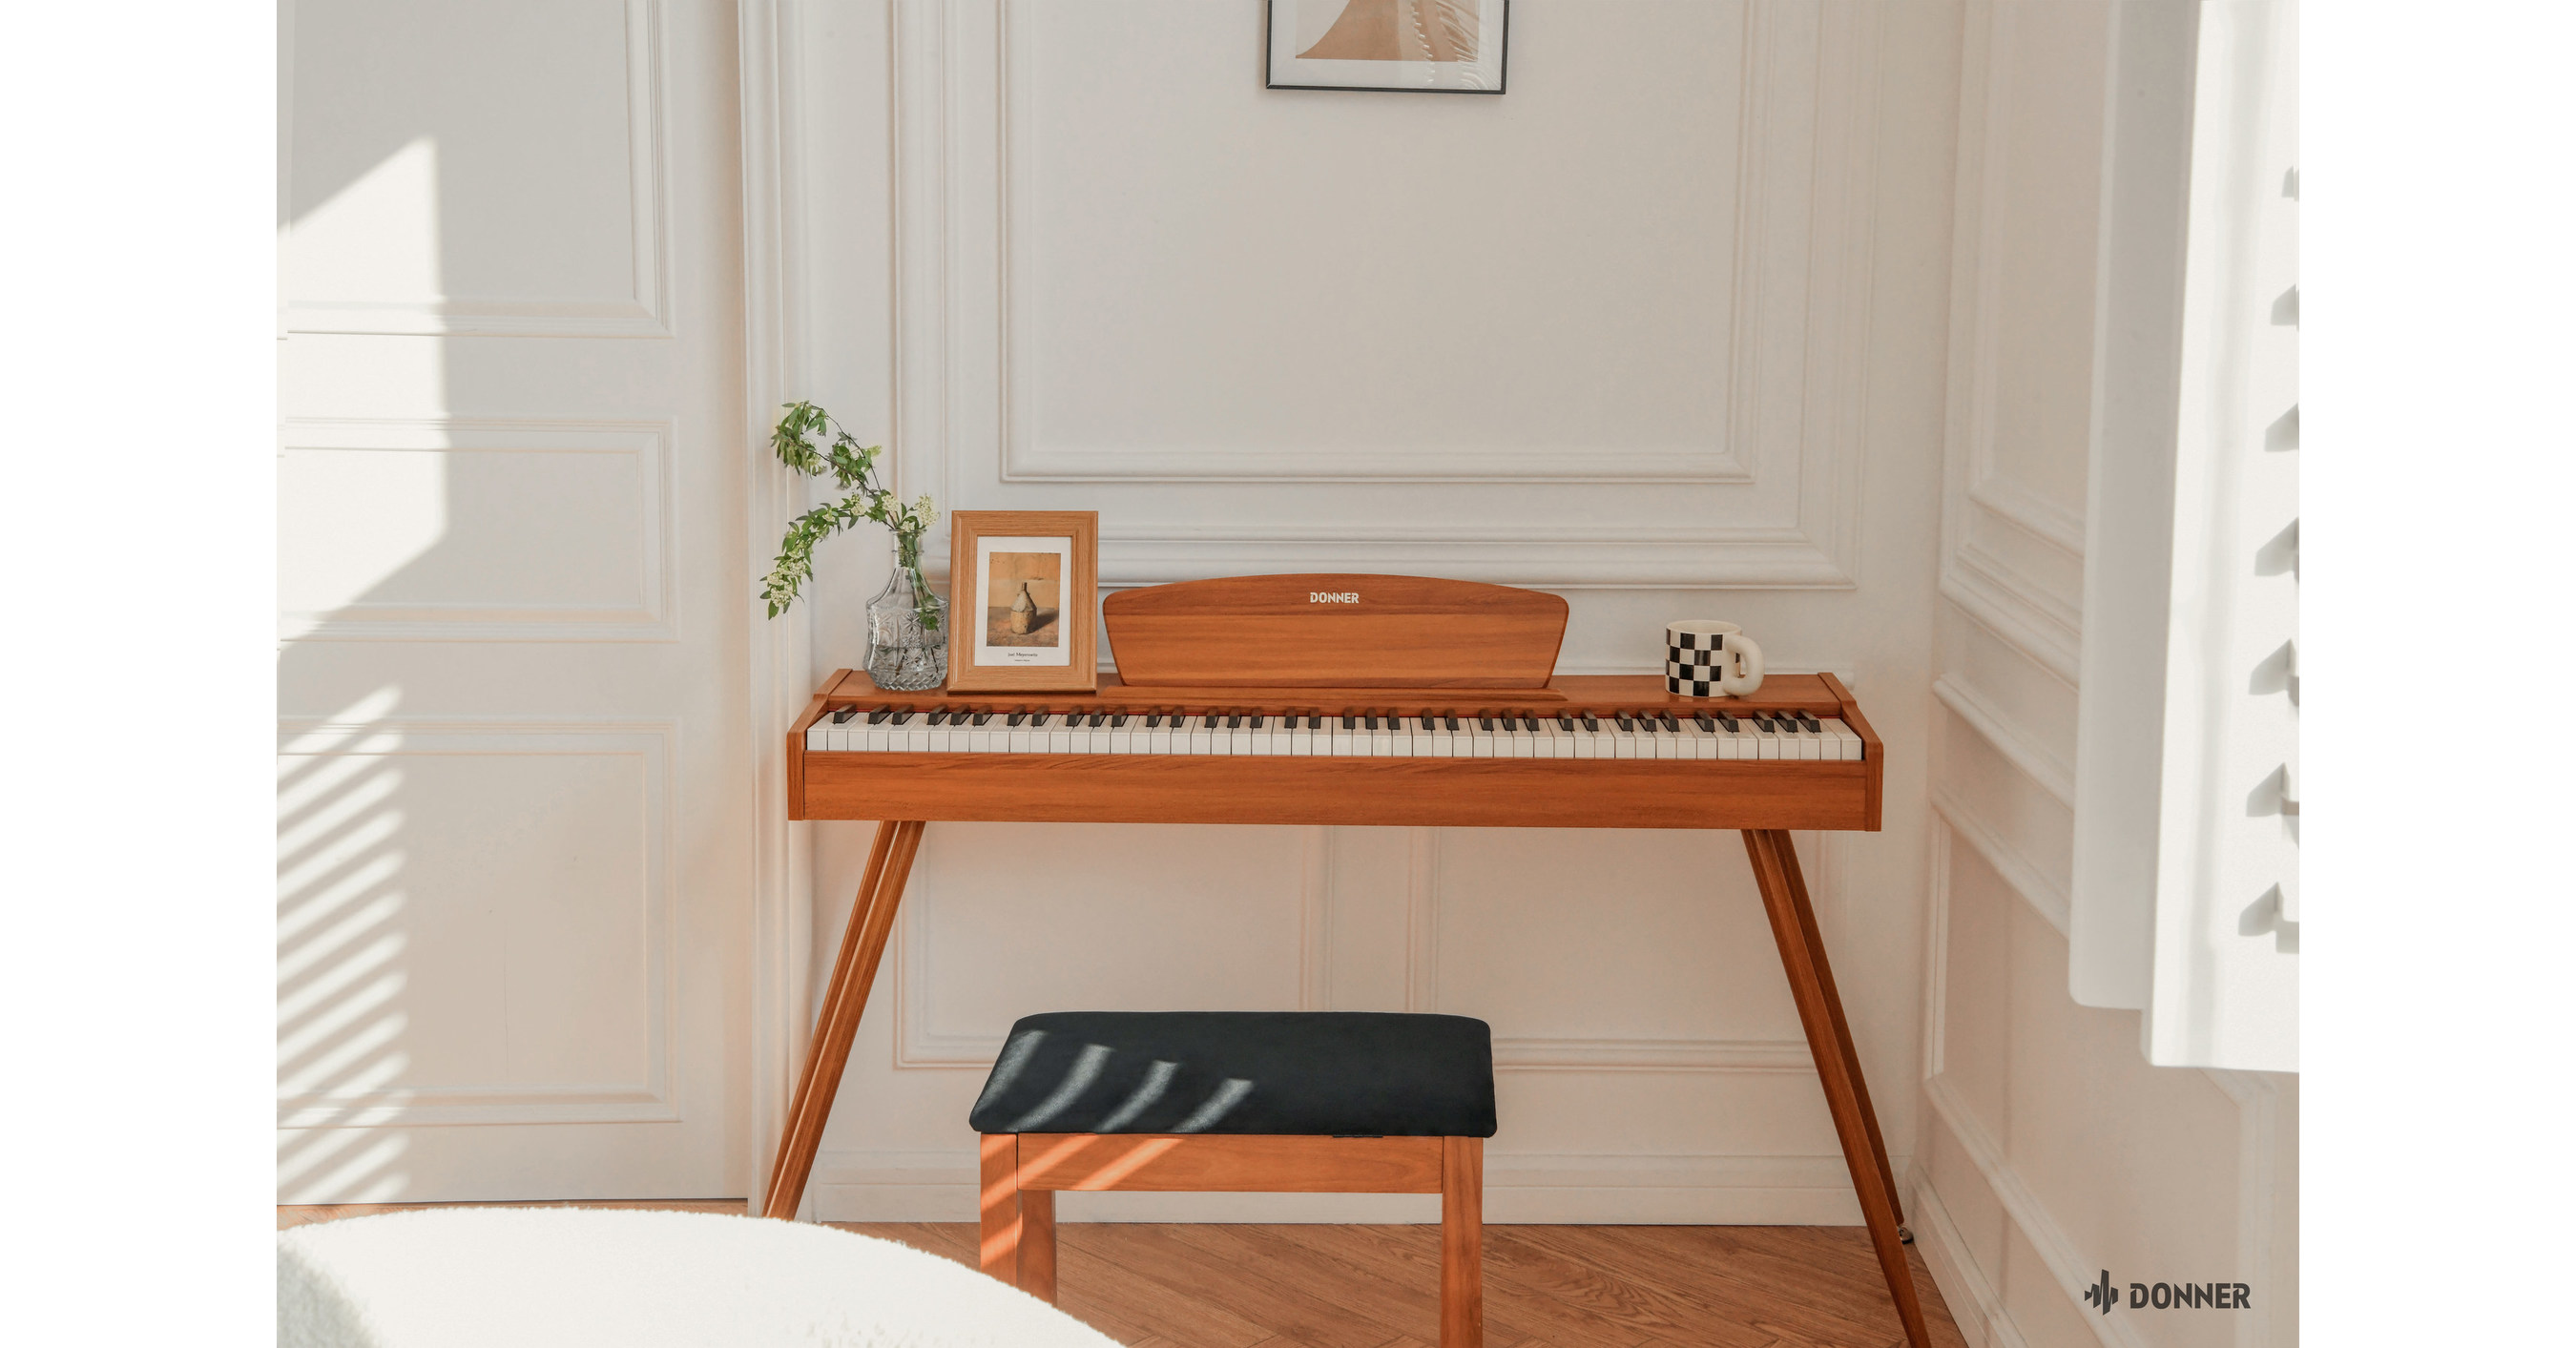 DONNER REIMAGINES DIGITAL PIANOS WITH THE VINTAGE, POWERFUL, AND